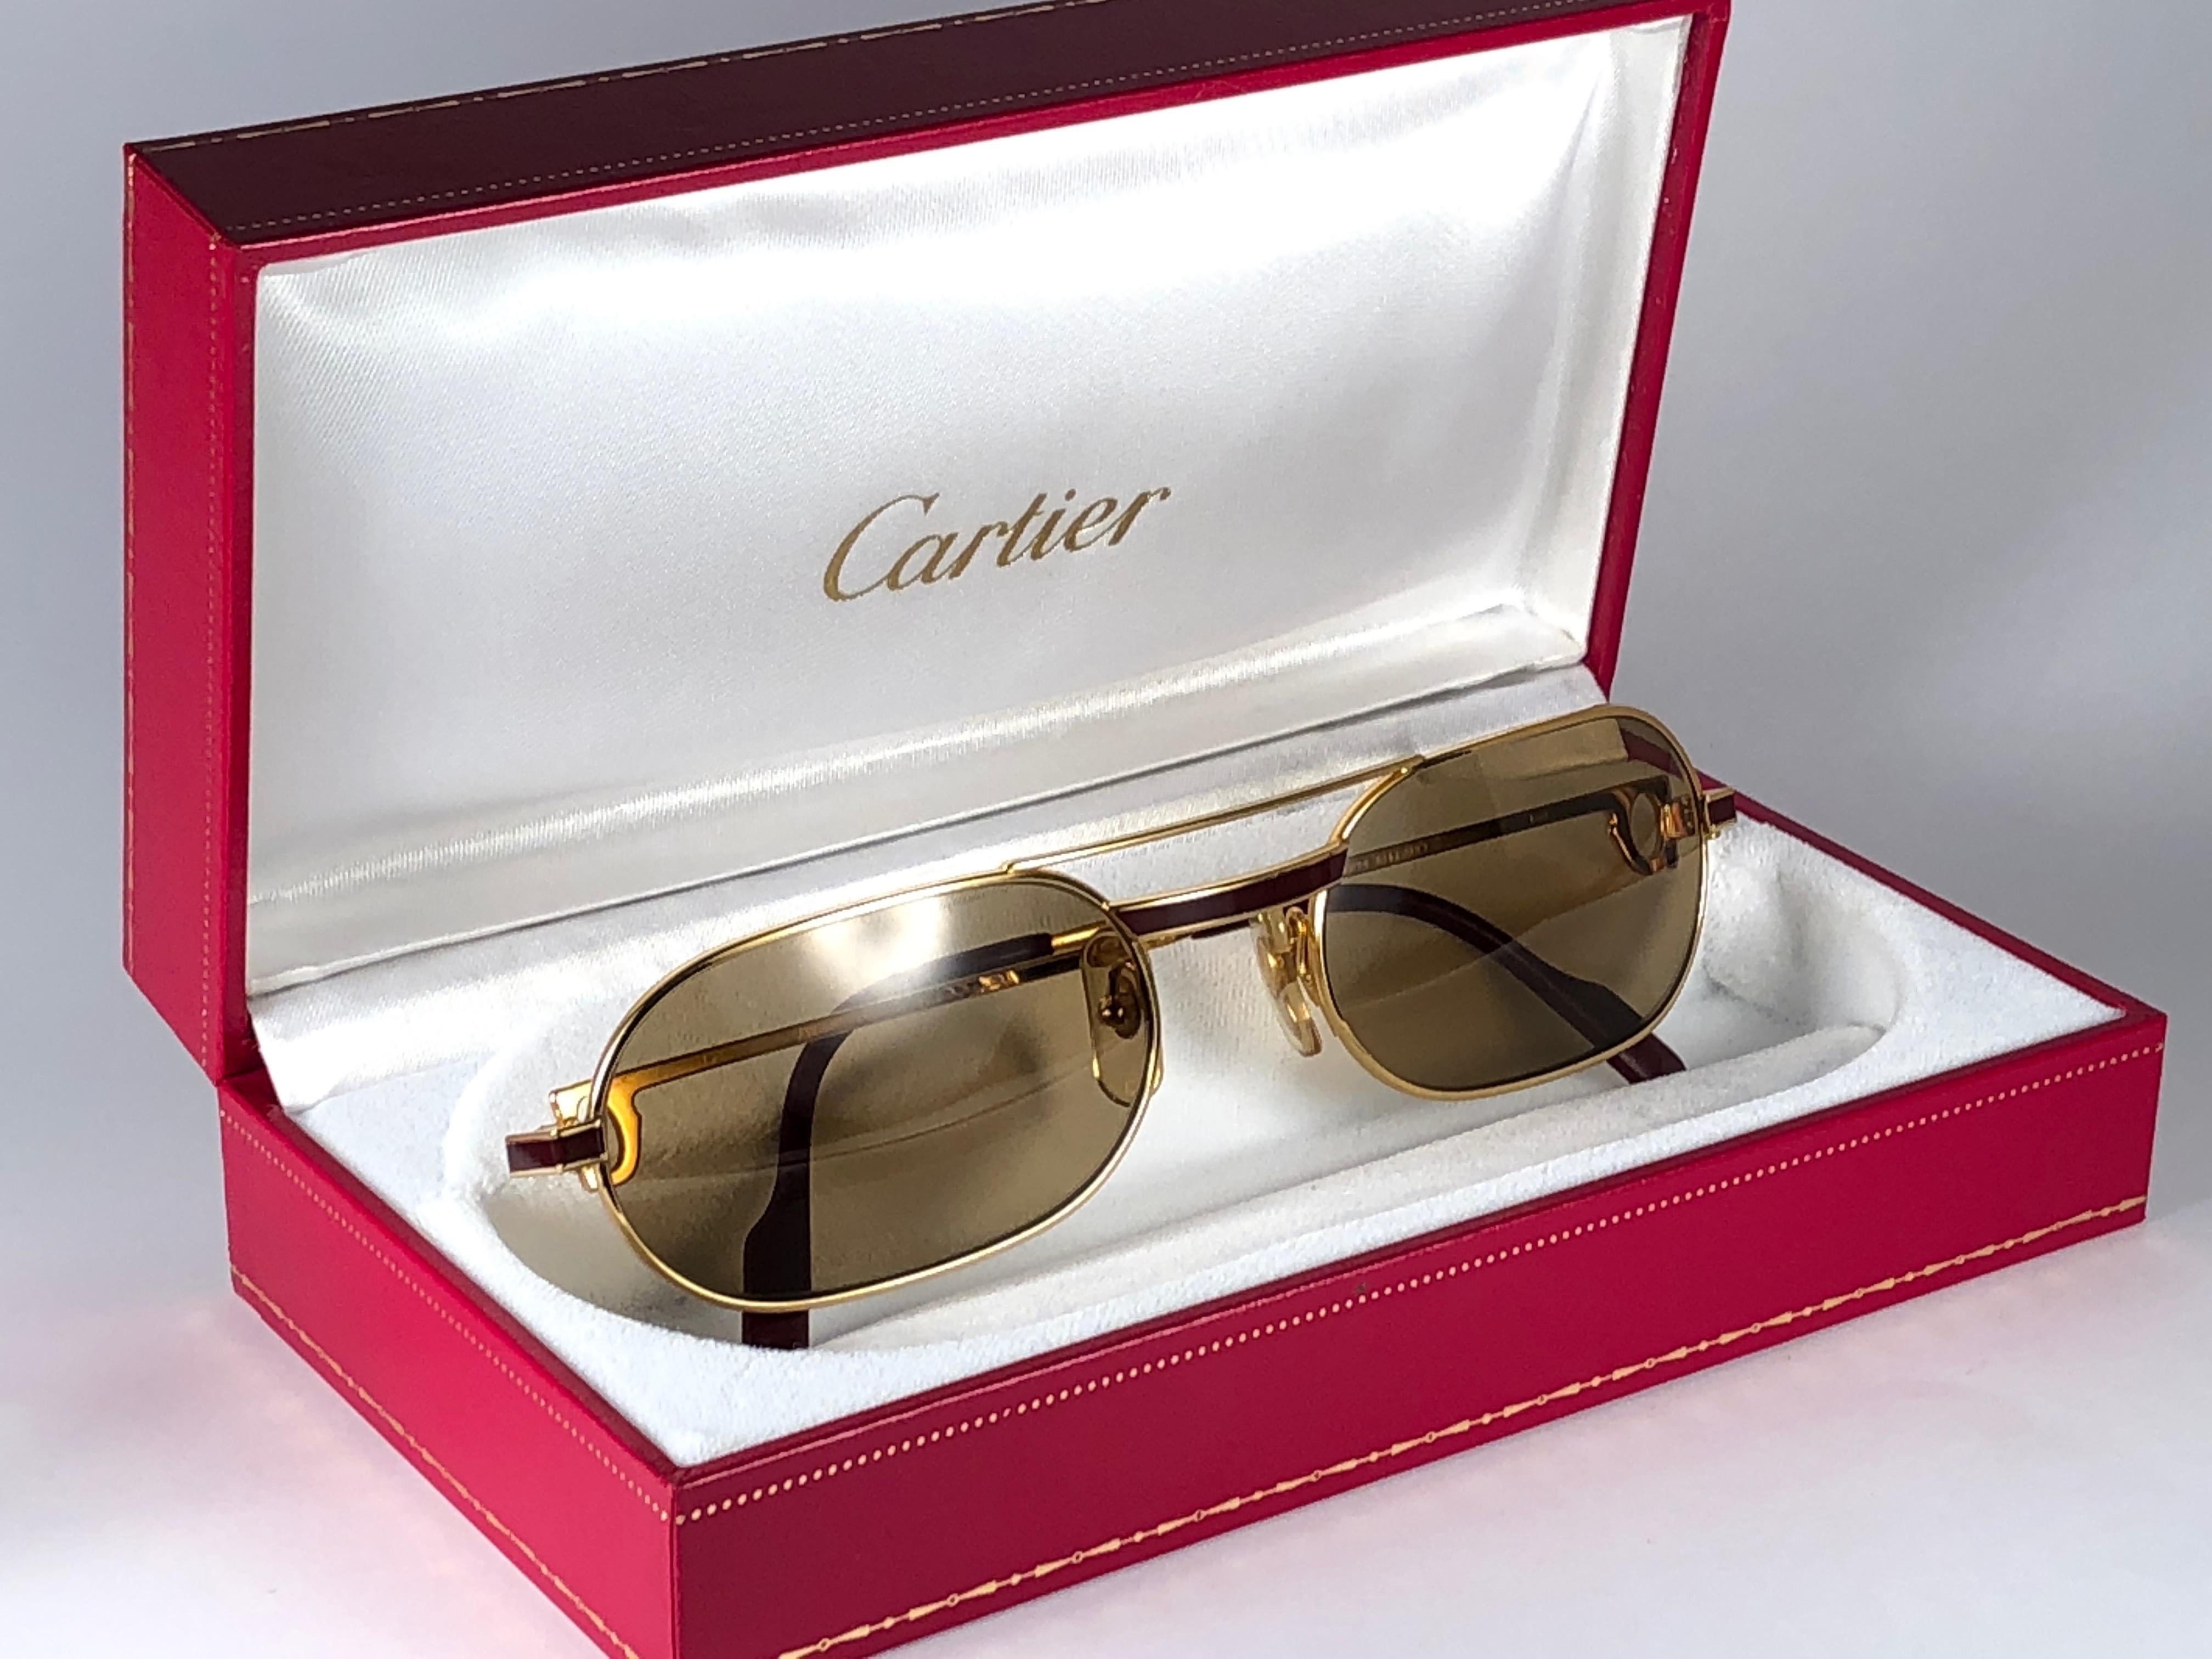 
Original 1983 Cartier Louis Cartier Laque De Chine sunglasses with medium brown lenses.  All hallmarks. Red enamel with Cartier gold signs on the burgundy ear paddles. Both arms sport the C from Cartier on the temple. These are like a pair of